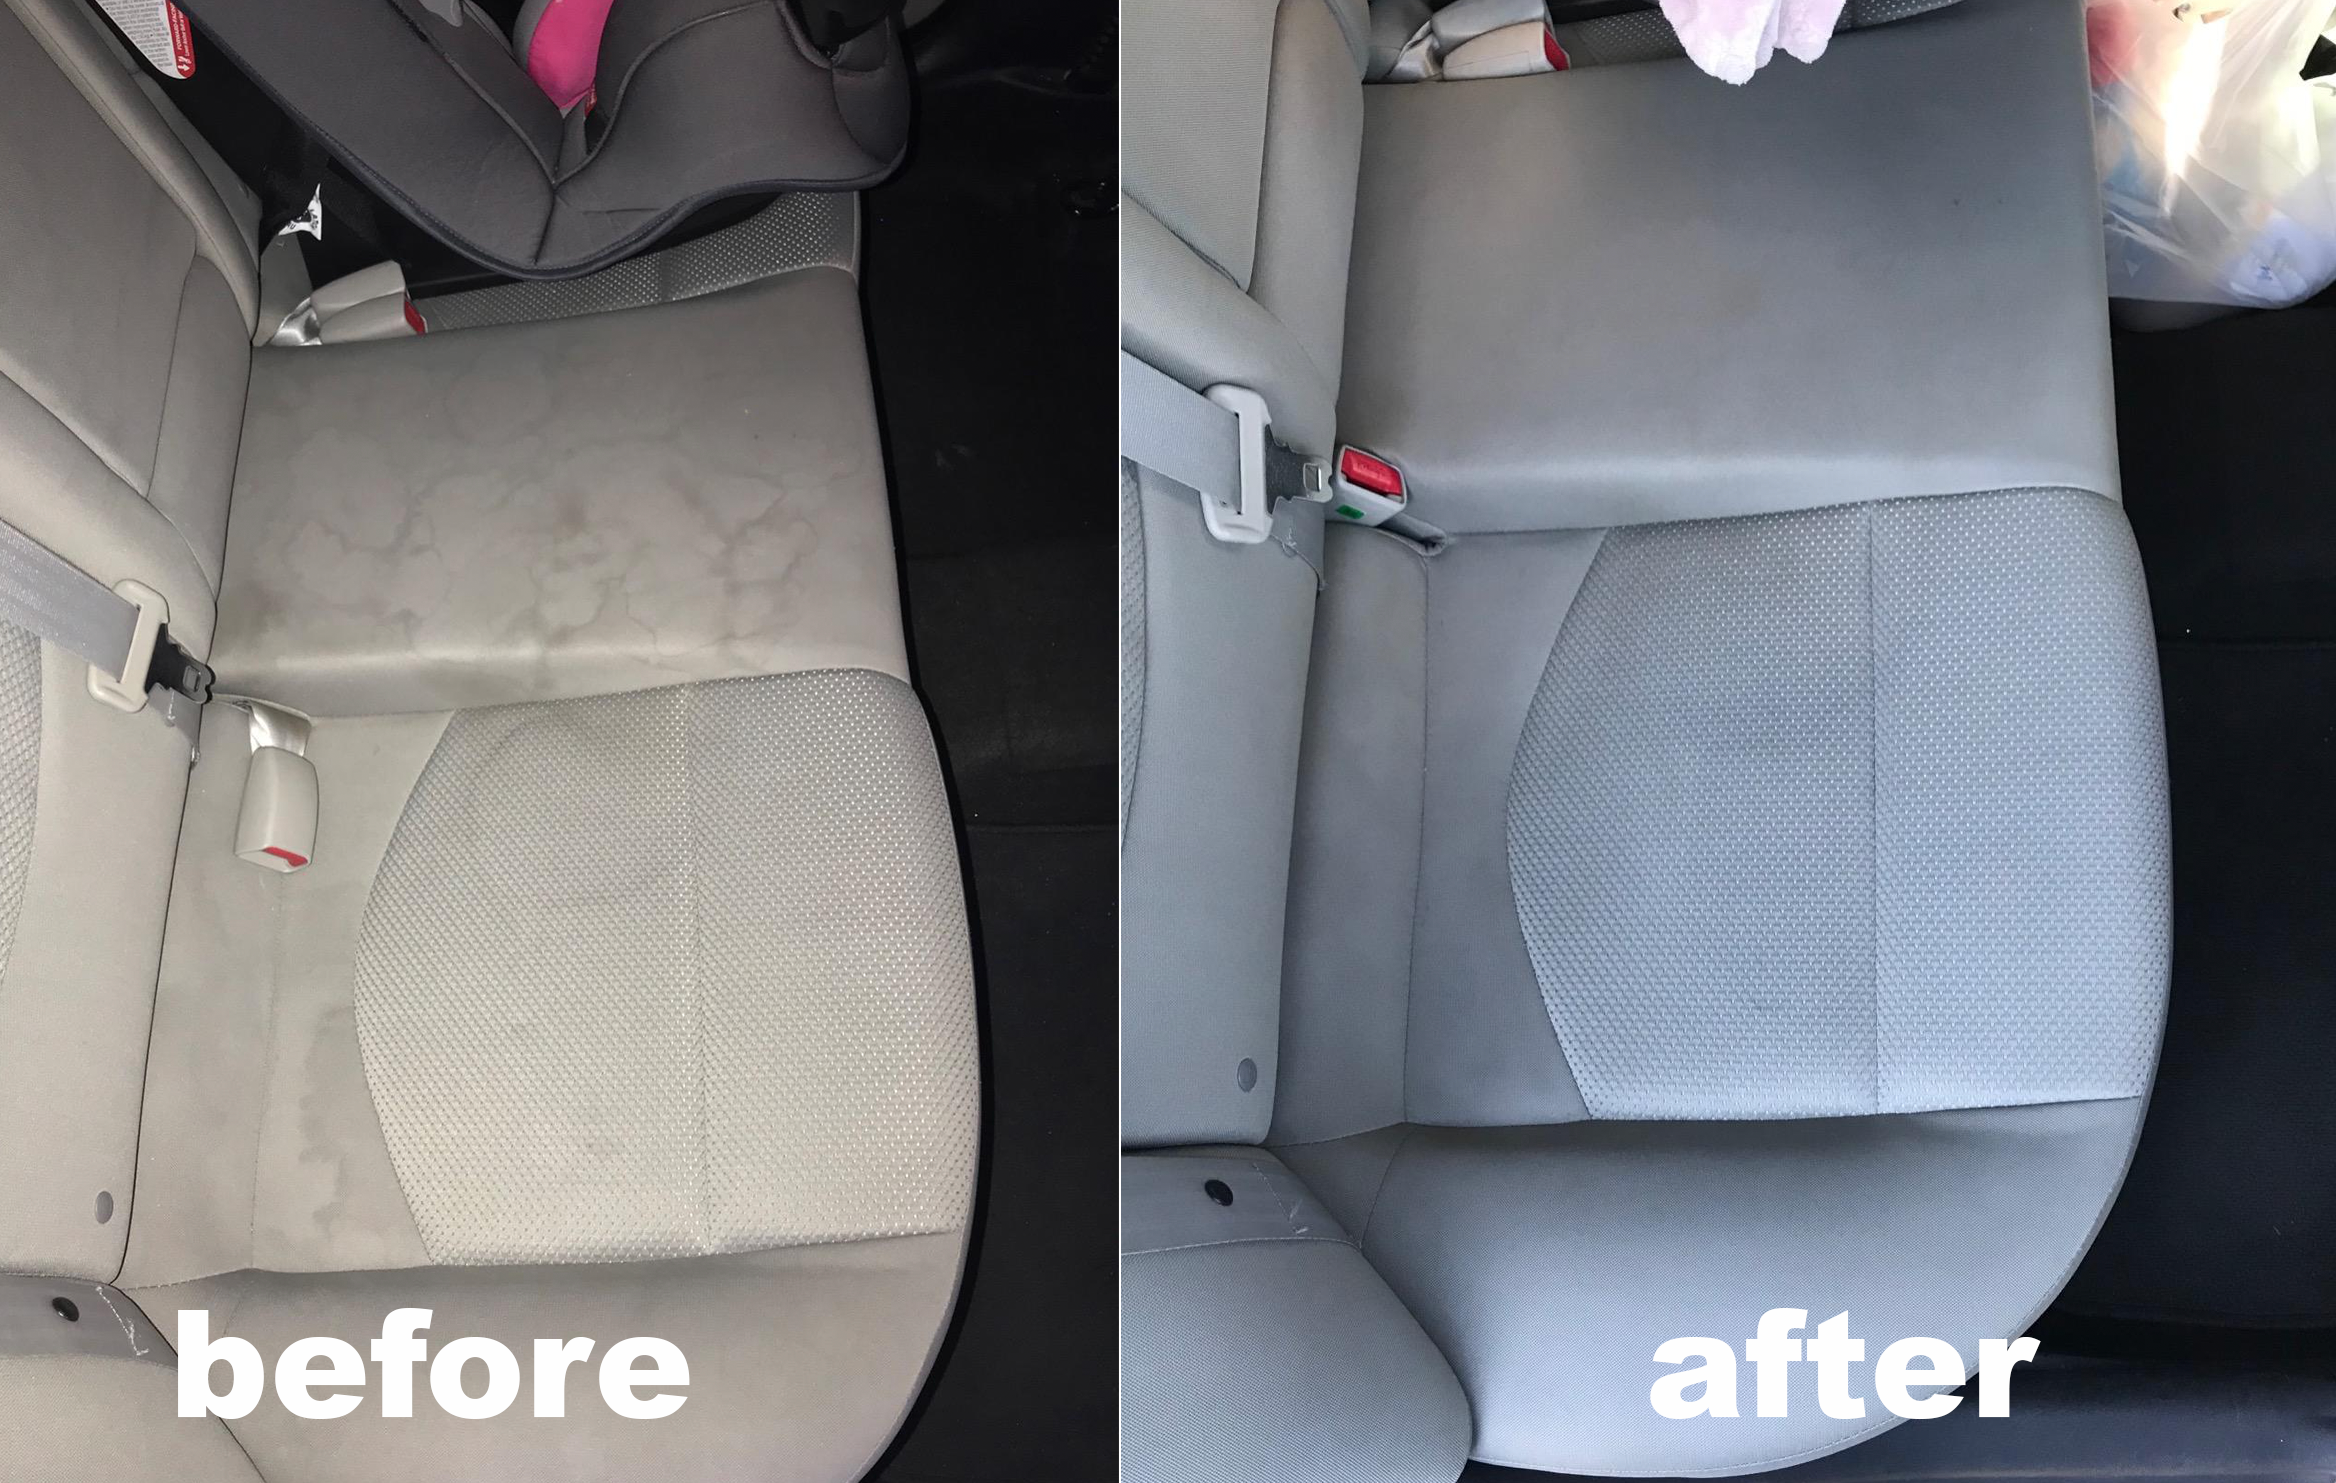 reviewer before and after images: the stained back seat of a car; after using the light &#x27;n easy steam mop, it is stain-free